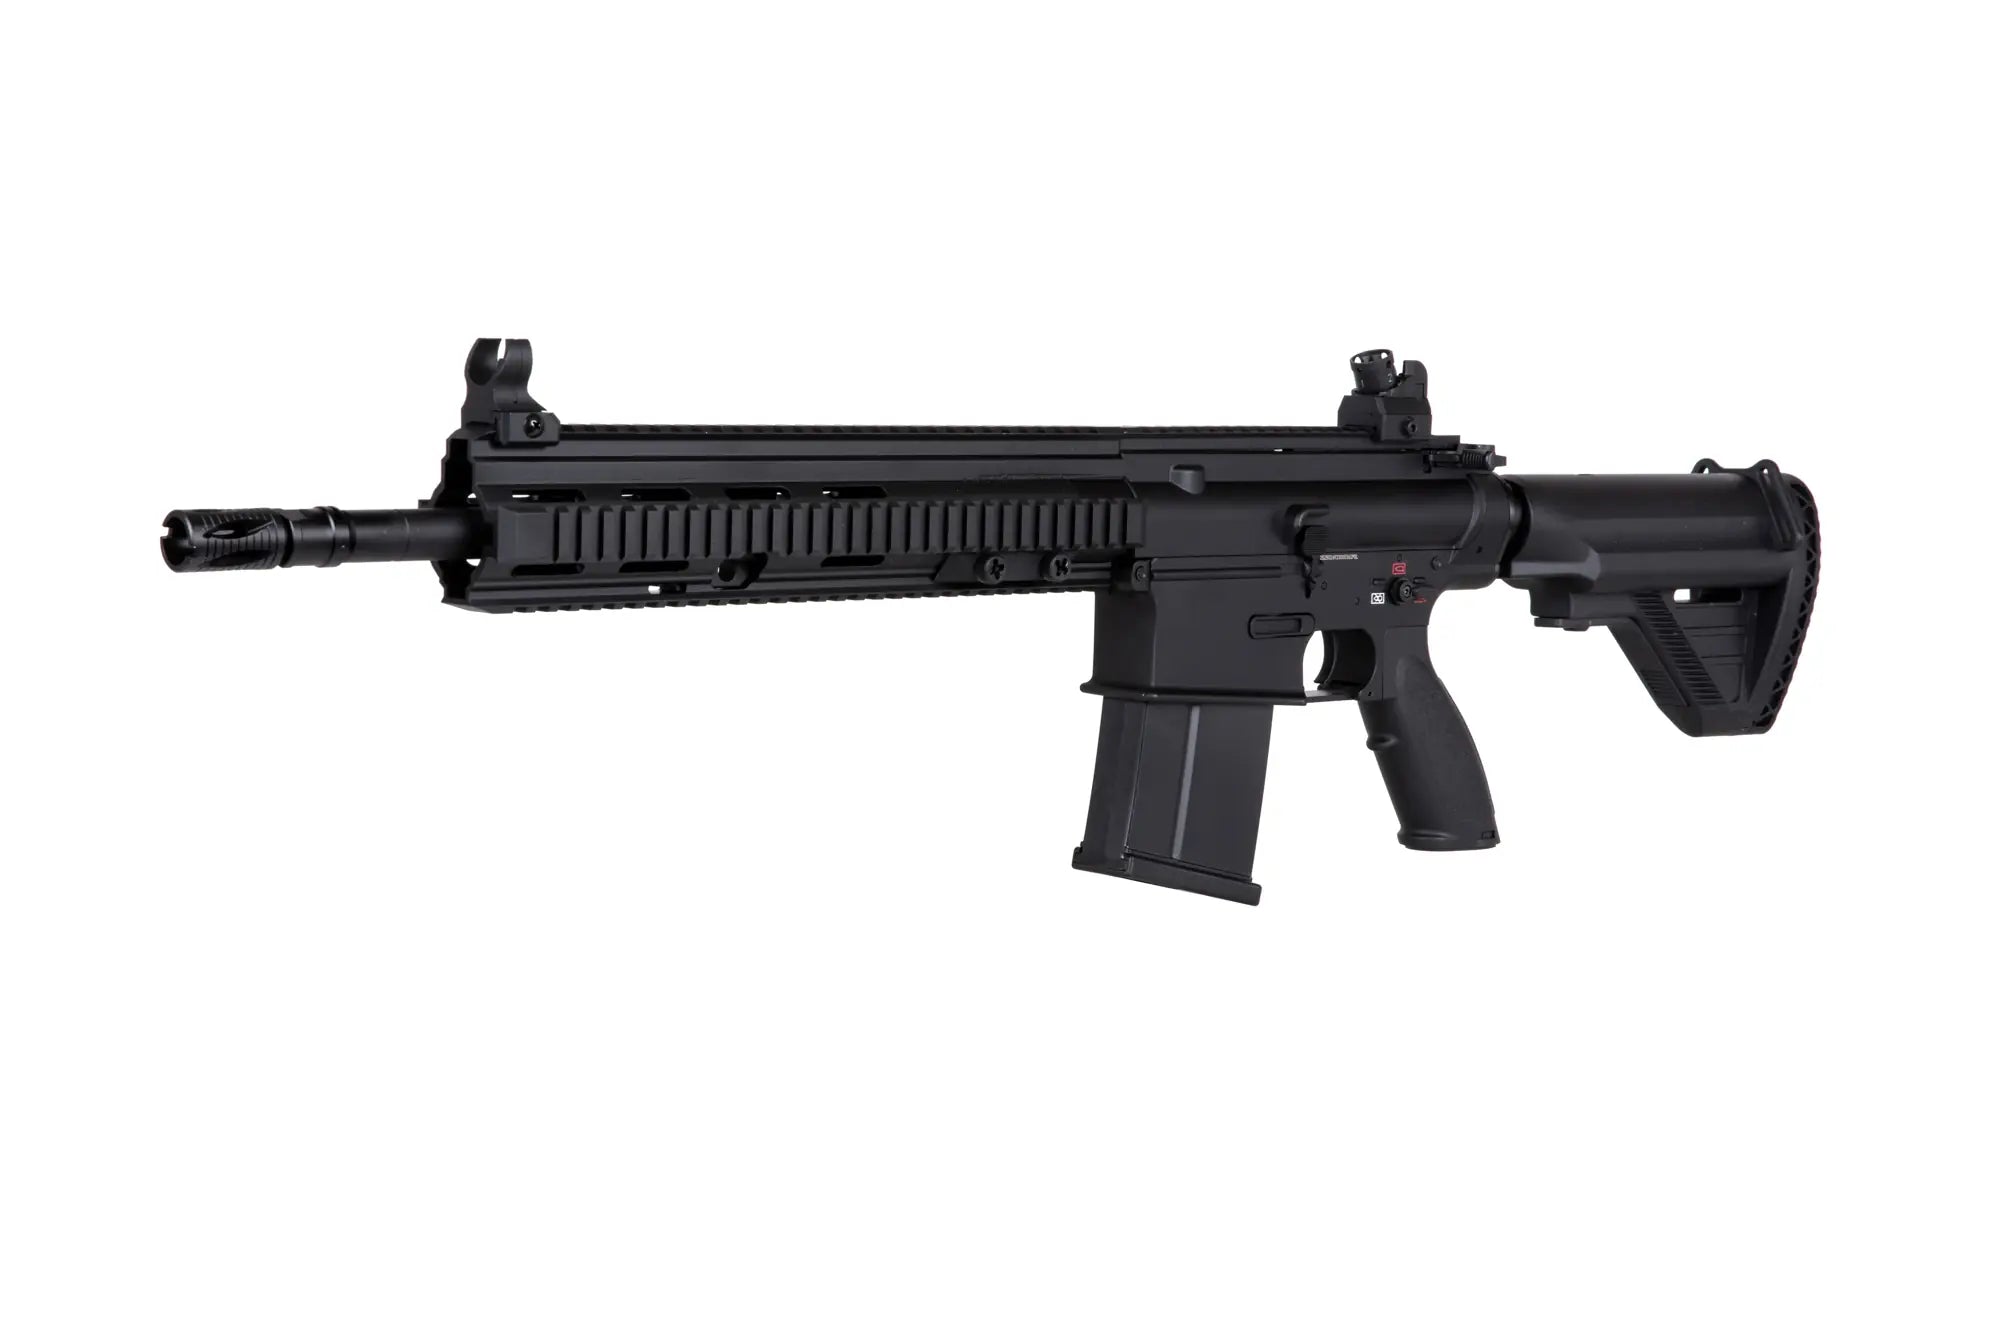 Airsoft Assault Rifles selection from the best brands